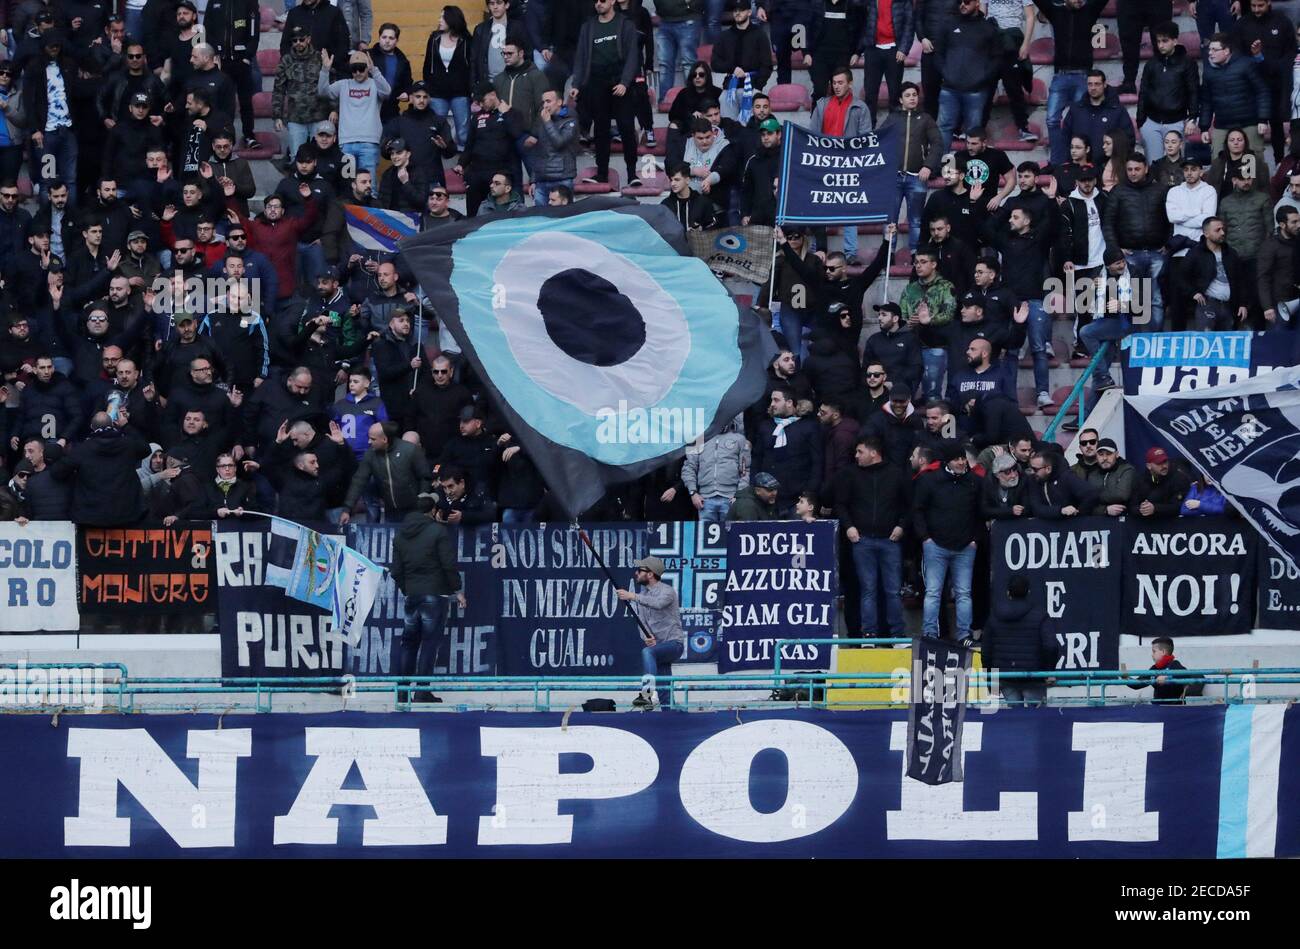 Soccer Football - Serie A - Napoli v Udinese Calcio - Stadio San Paolo,  Naples, Italy - March 17, 2019 Napoli fans display banners and wave flags  before the match REUTERS/Ciro De Luca Stock Photo - Alamy